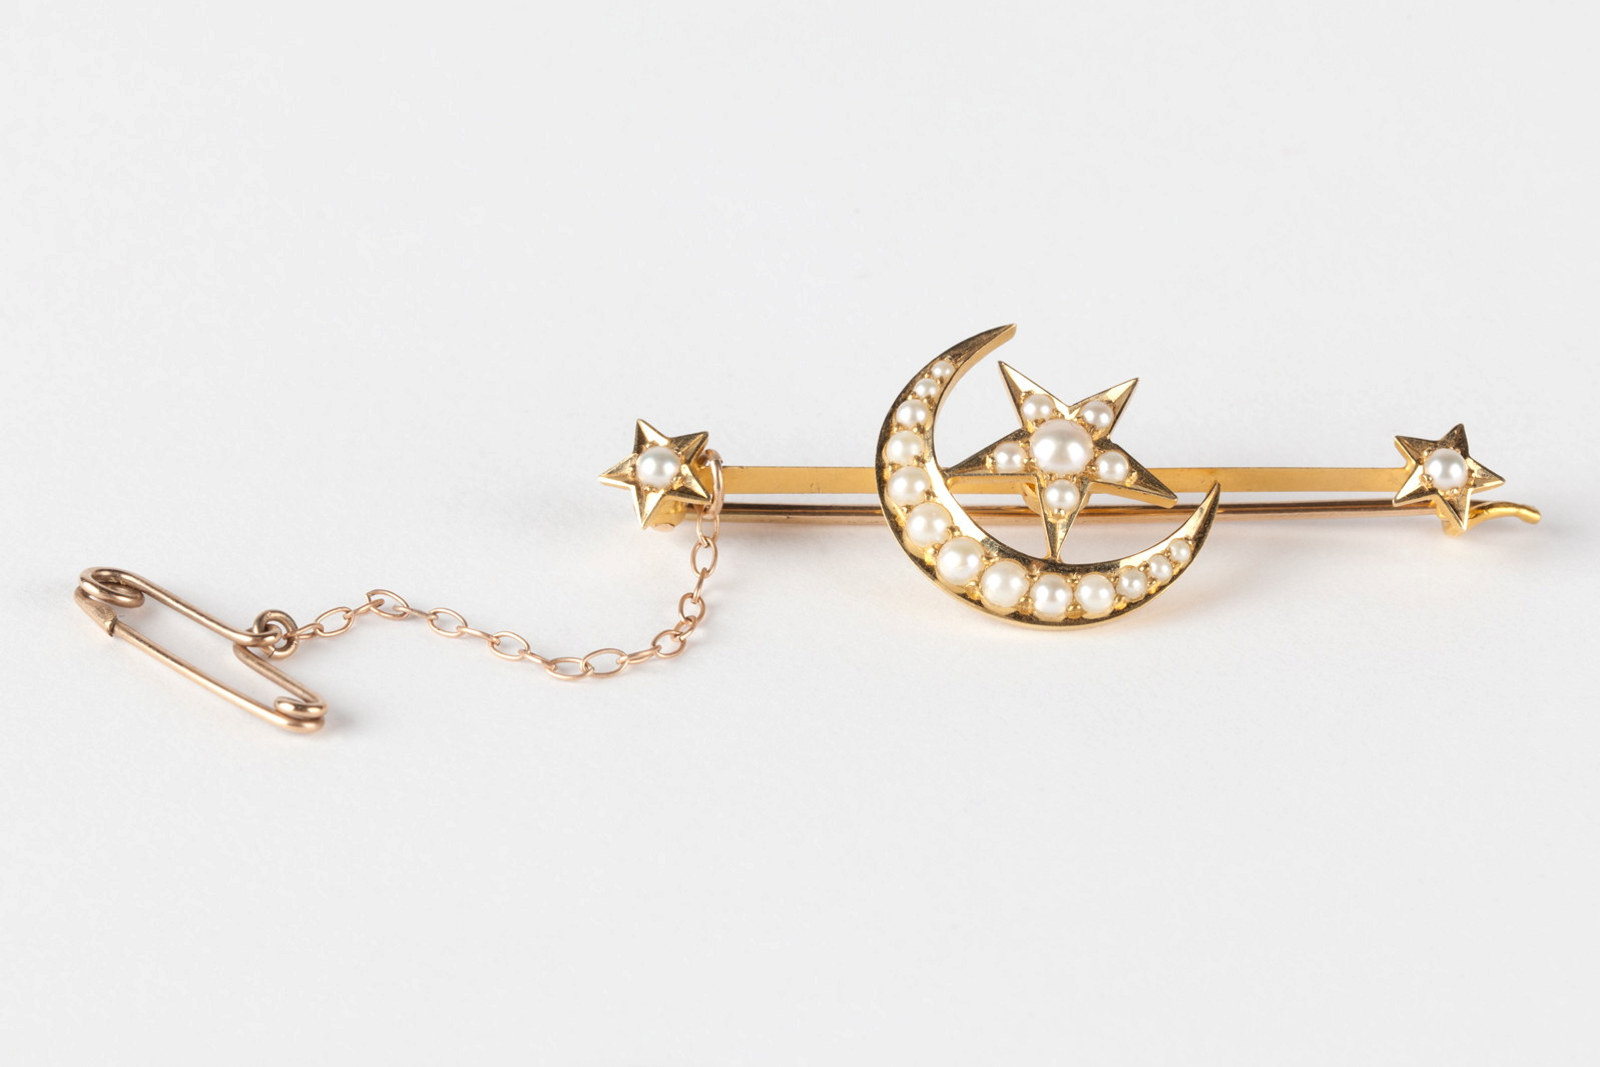 Gold bar brooch with a star and crescent moon design set with pearls, circa 1886